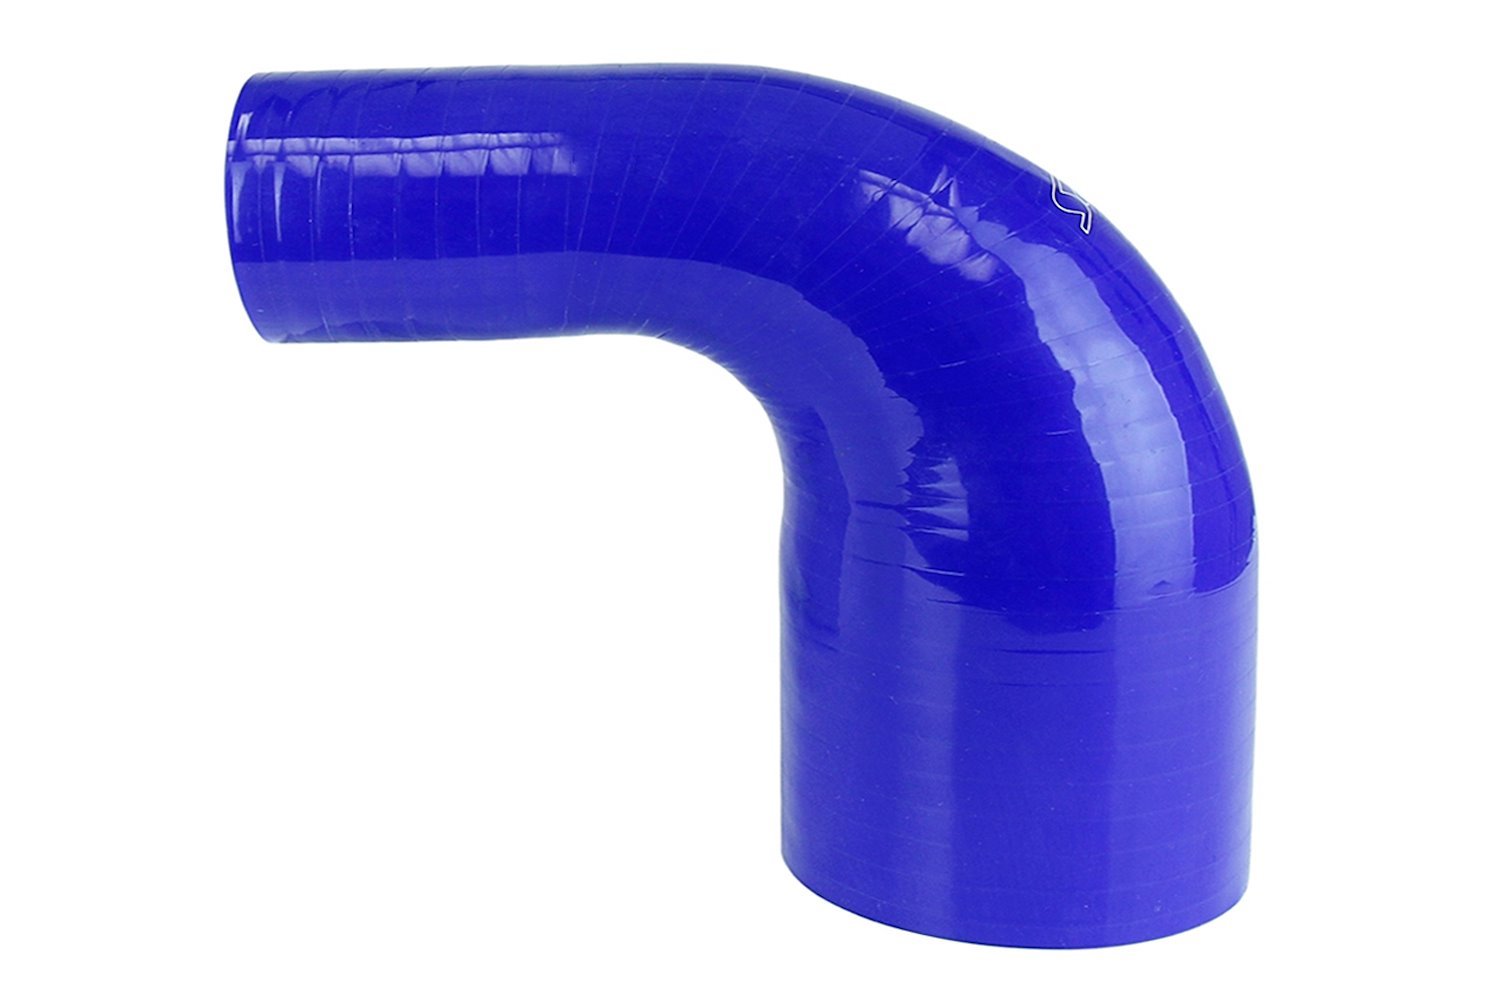 HTSER90-350-400-BLUE Silicone 90-Degree Elbow Hose, High-Temp 4-Ply Reinforced, 3-1/2 in. - 4 in. ID, Blue